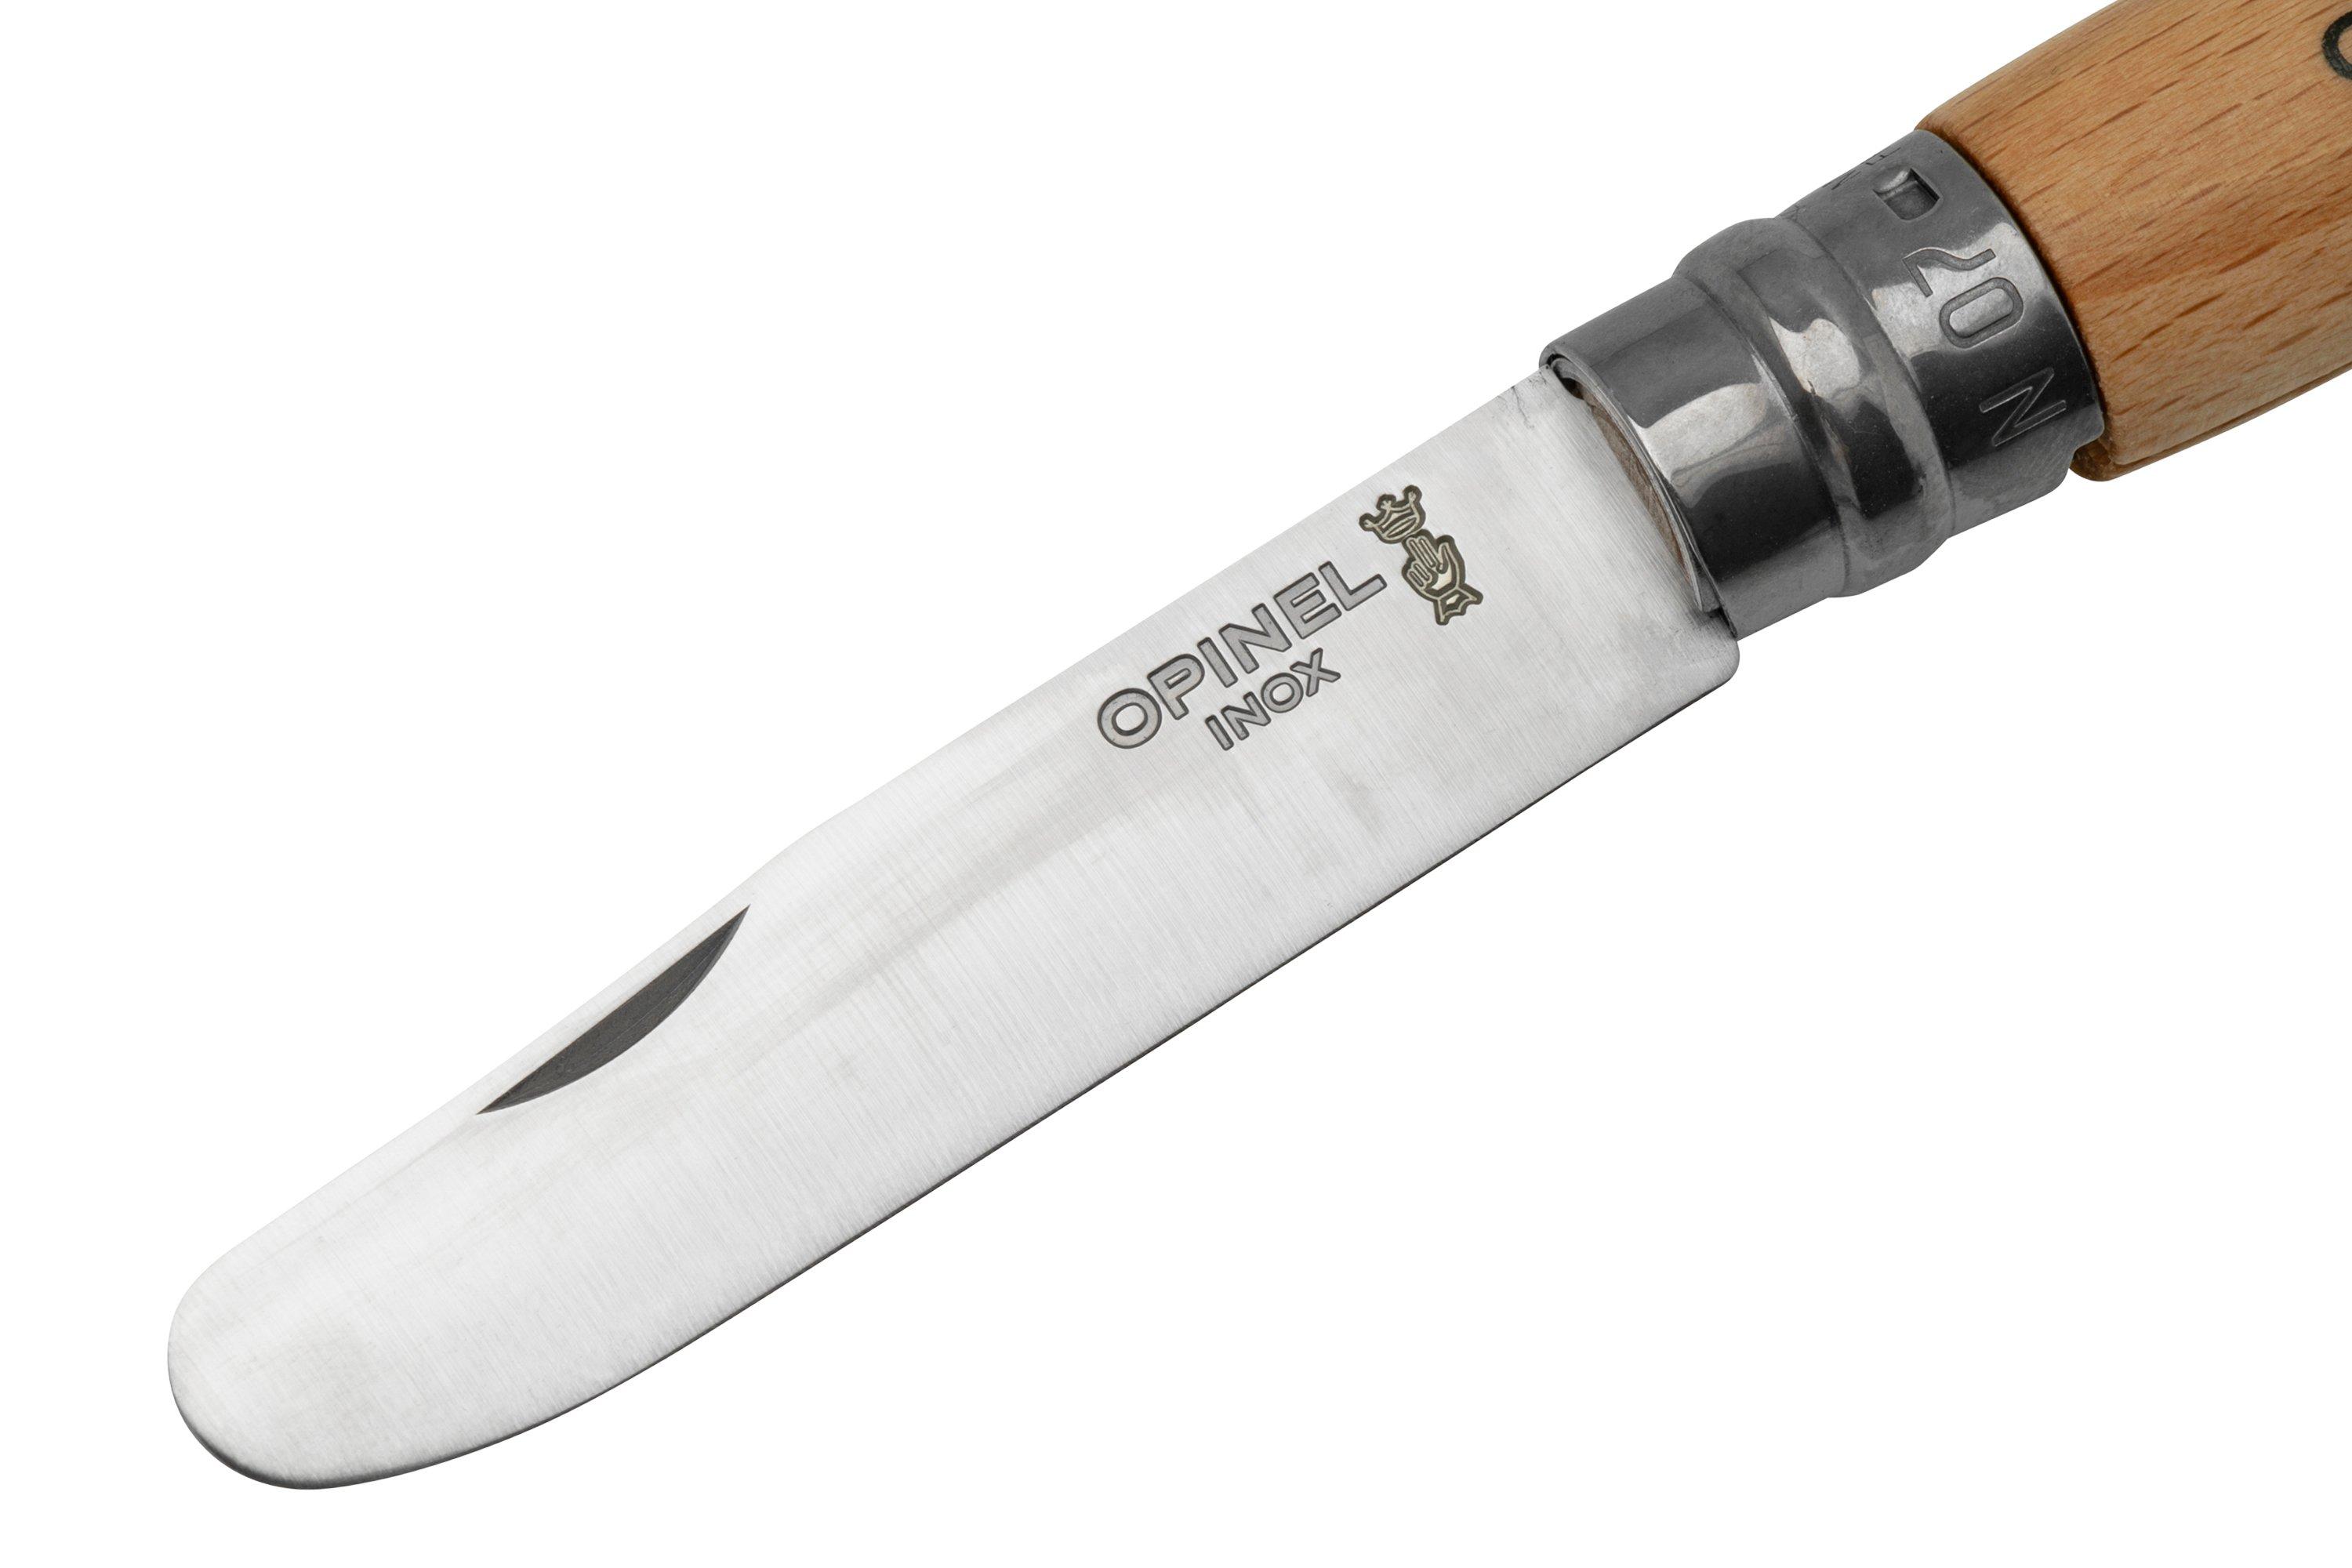 Couteau Animopinel n°7 Opinel, Achat Couteaux Enfant, Acheter